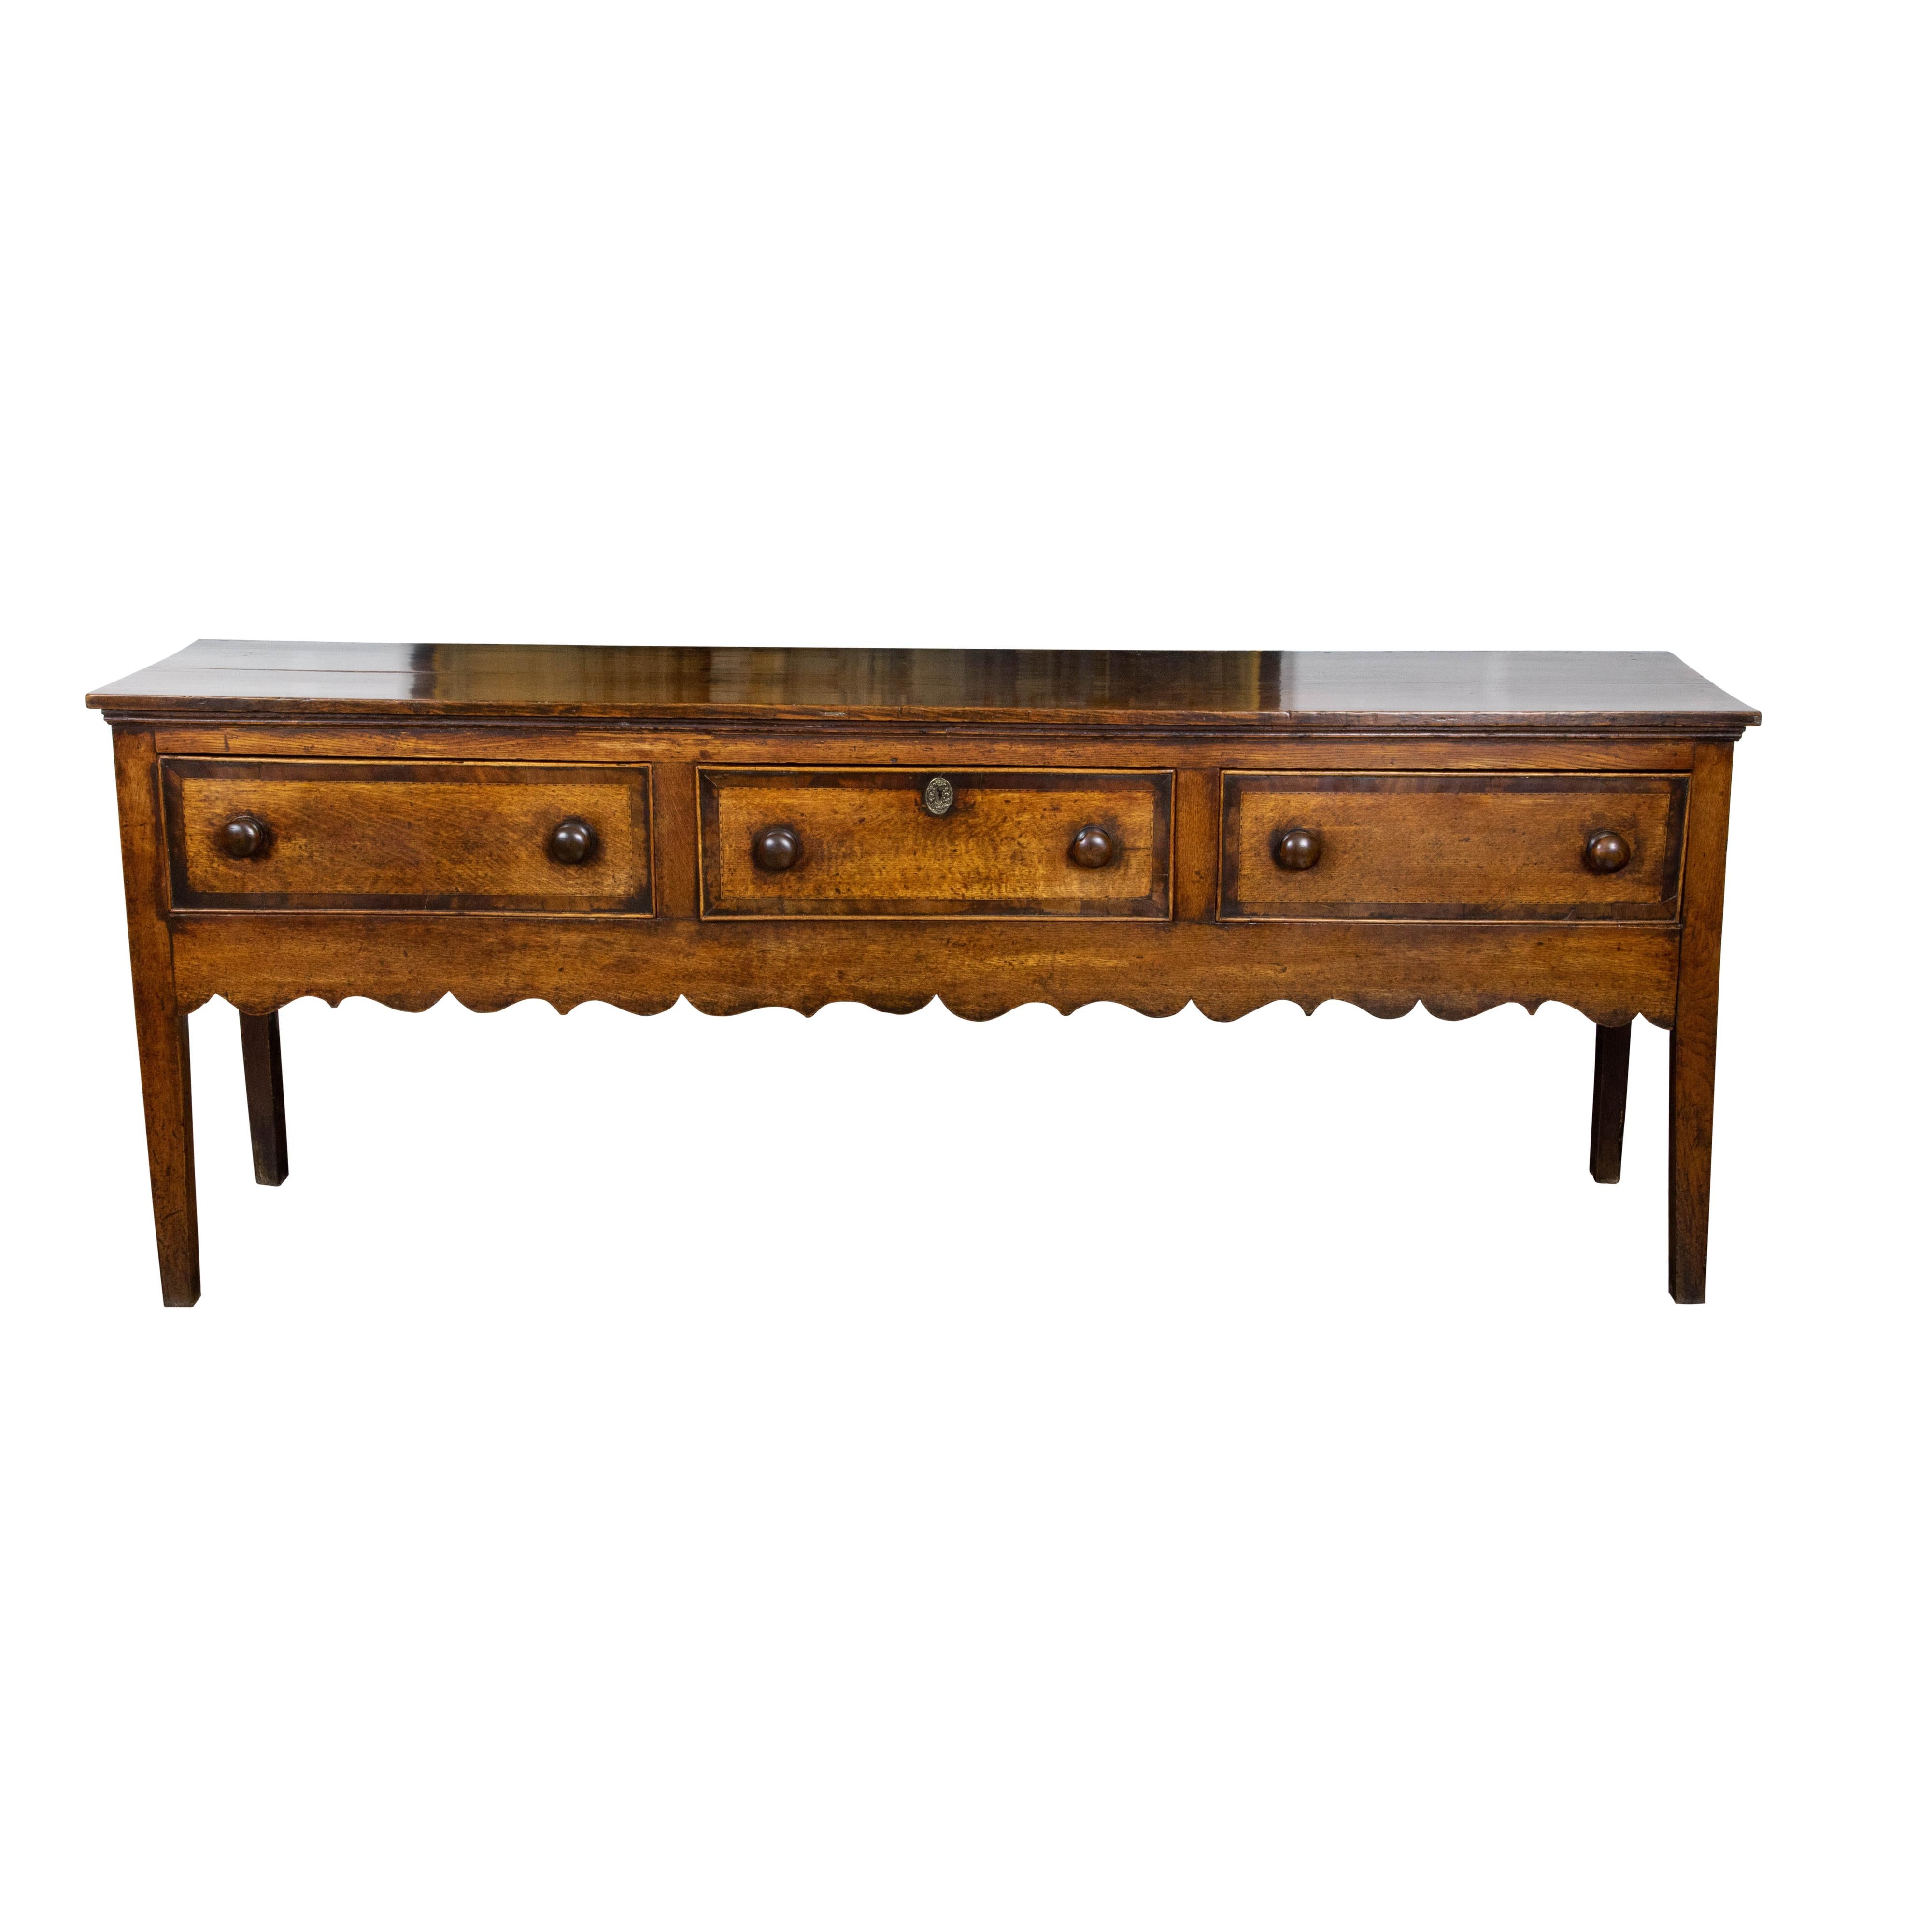 Carved English George III 1800s Oak Dresser Base with Three Drawers and Scalloped Apron